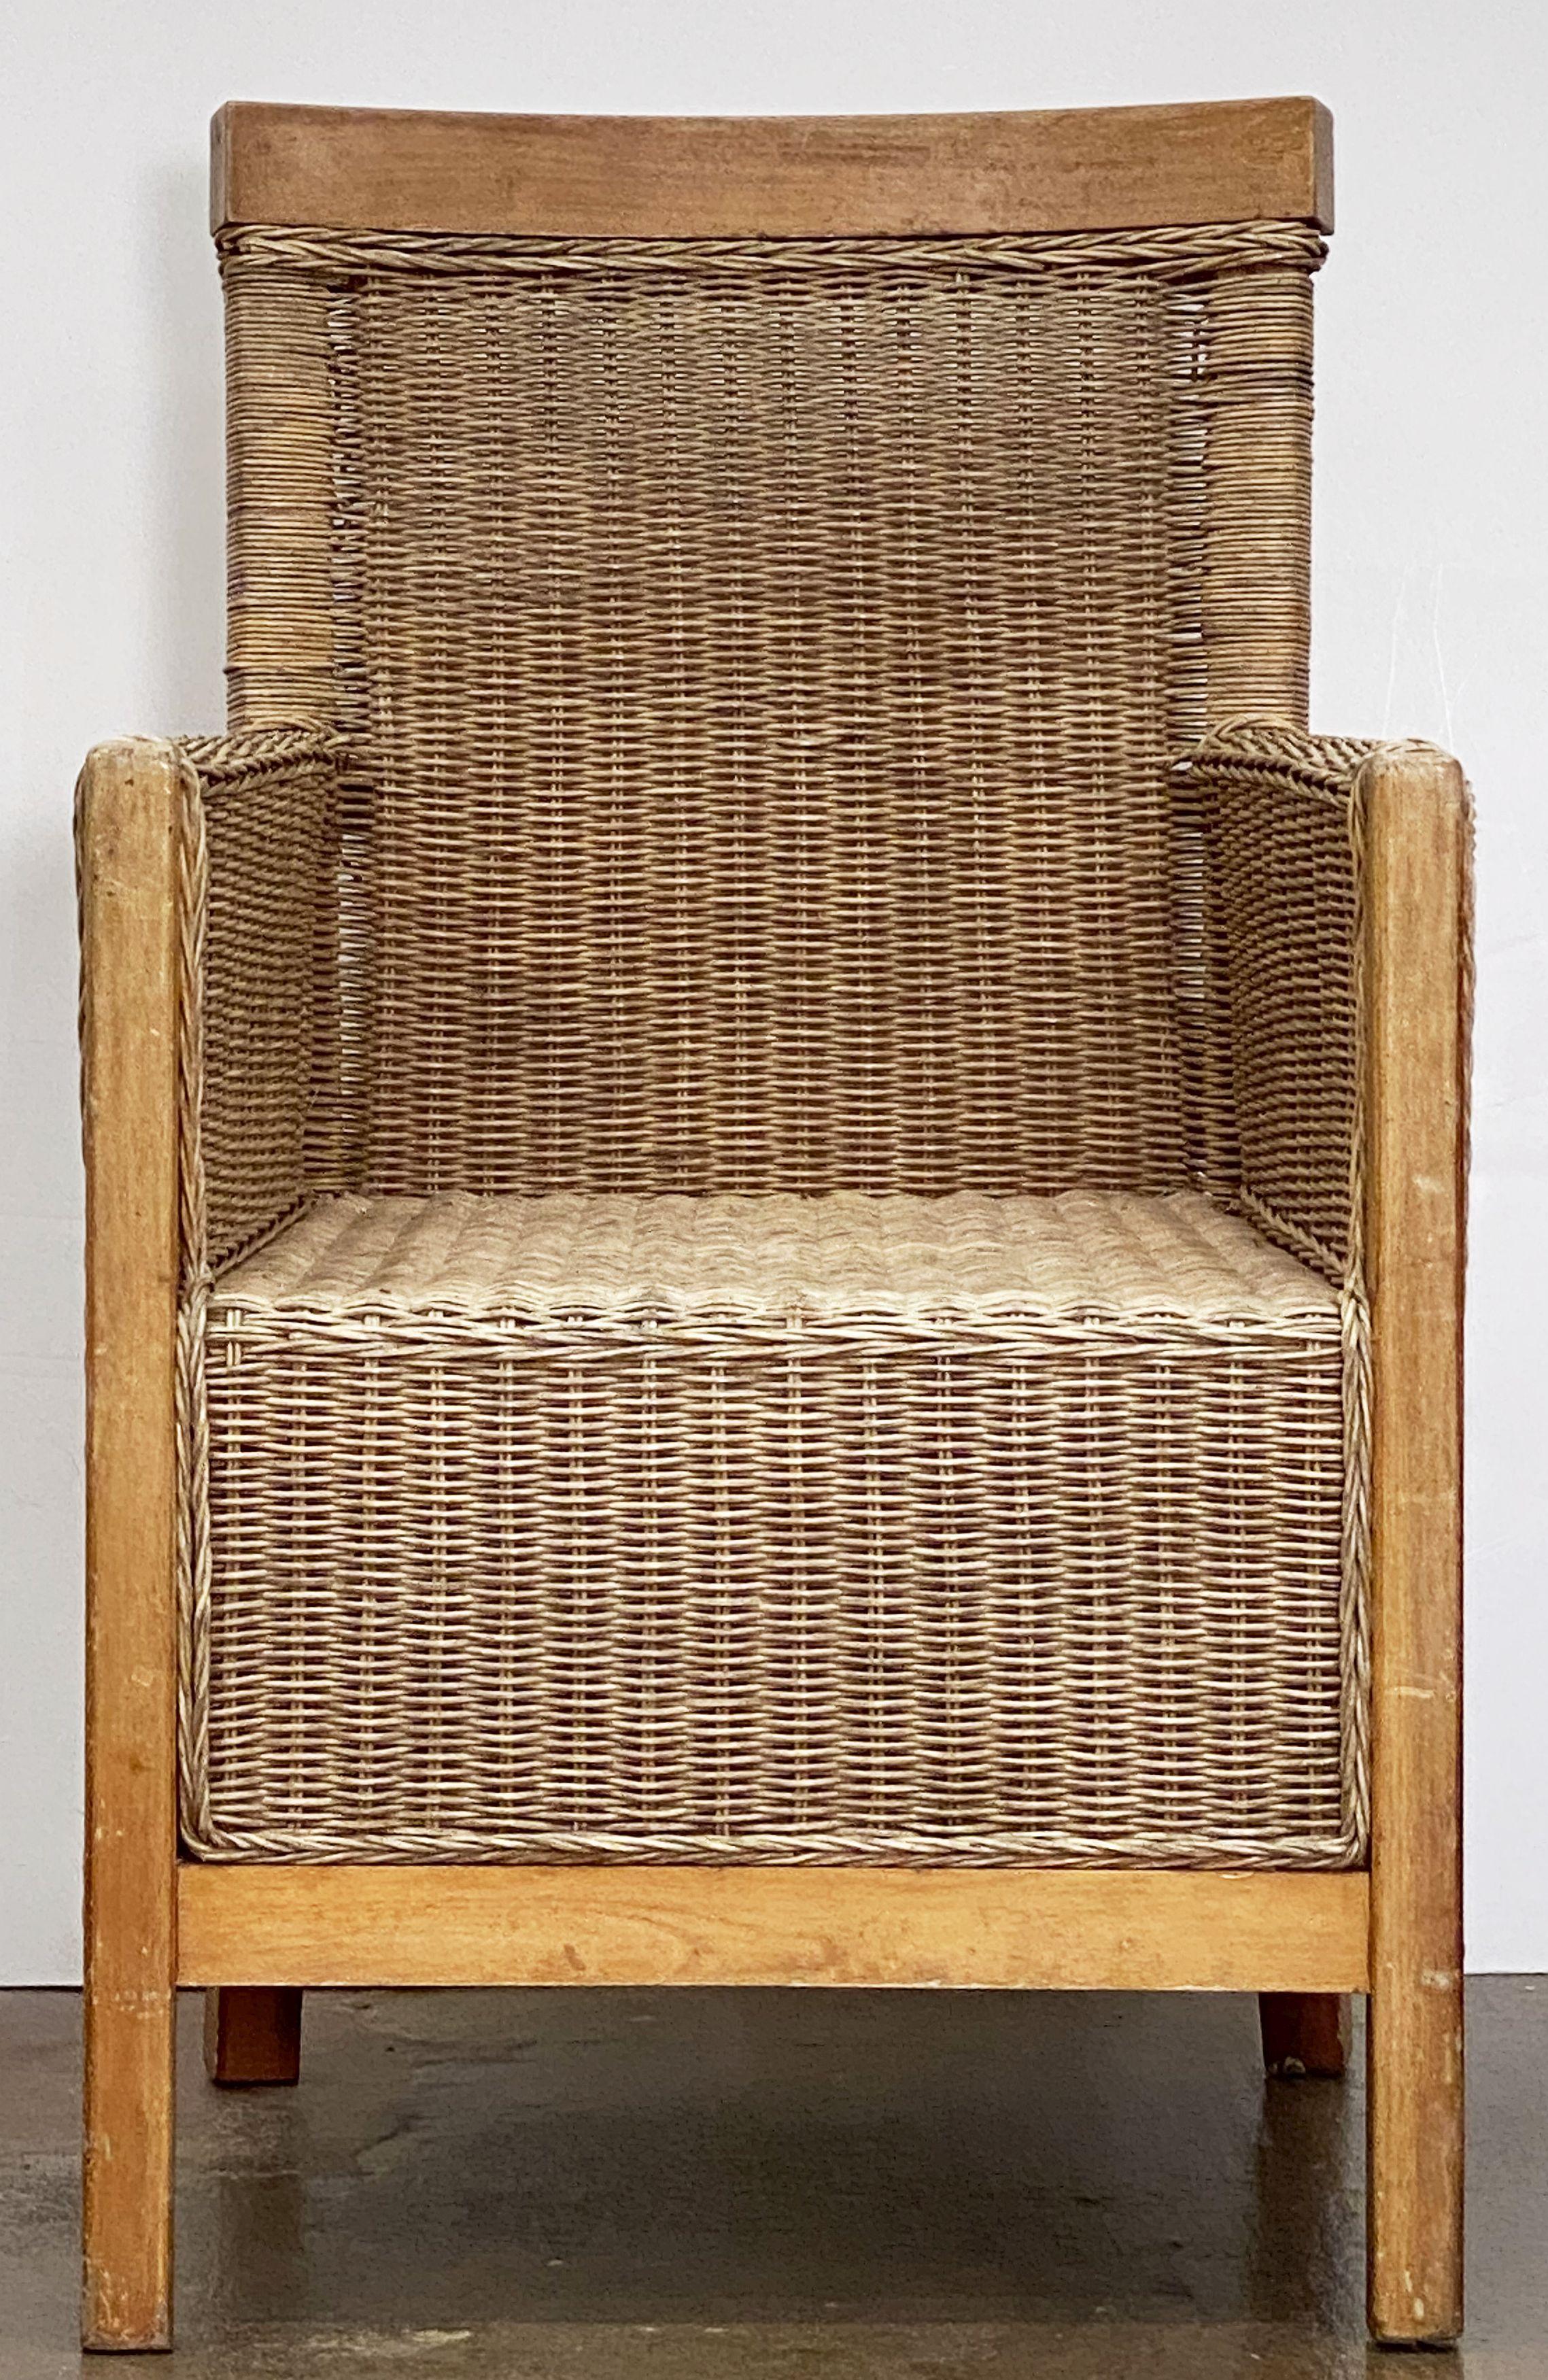 A fine large French armchair or lounge chair of woven wicker cane and beechwood featuring a comfortable back and seat and a sturdy modern design.

Two available.